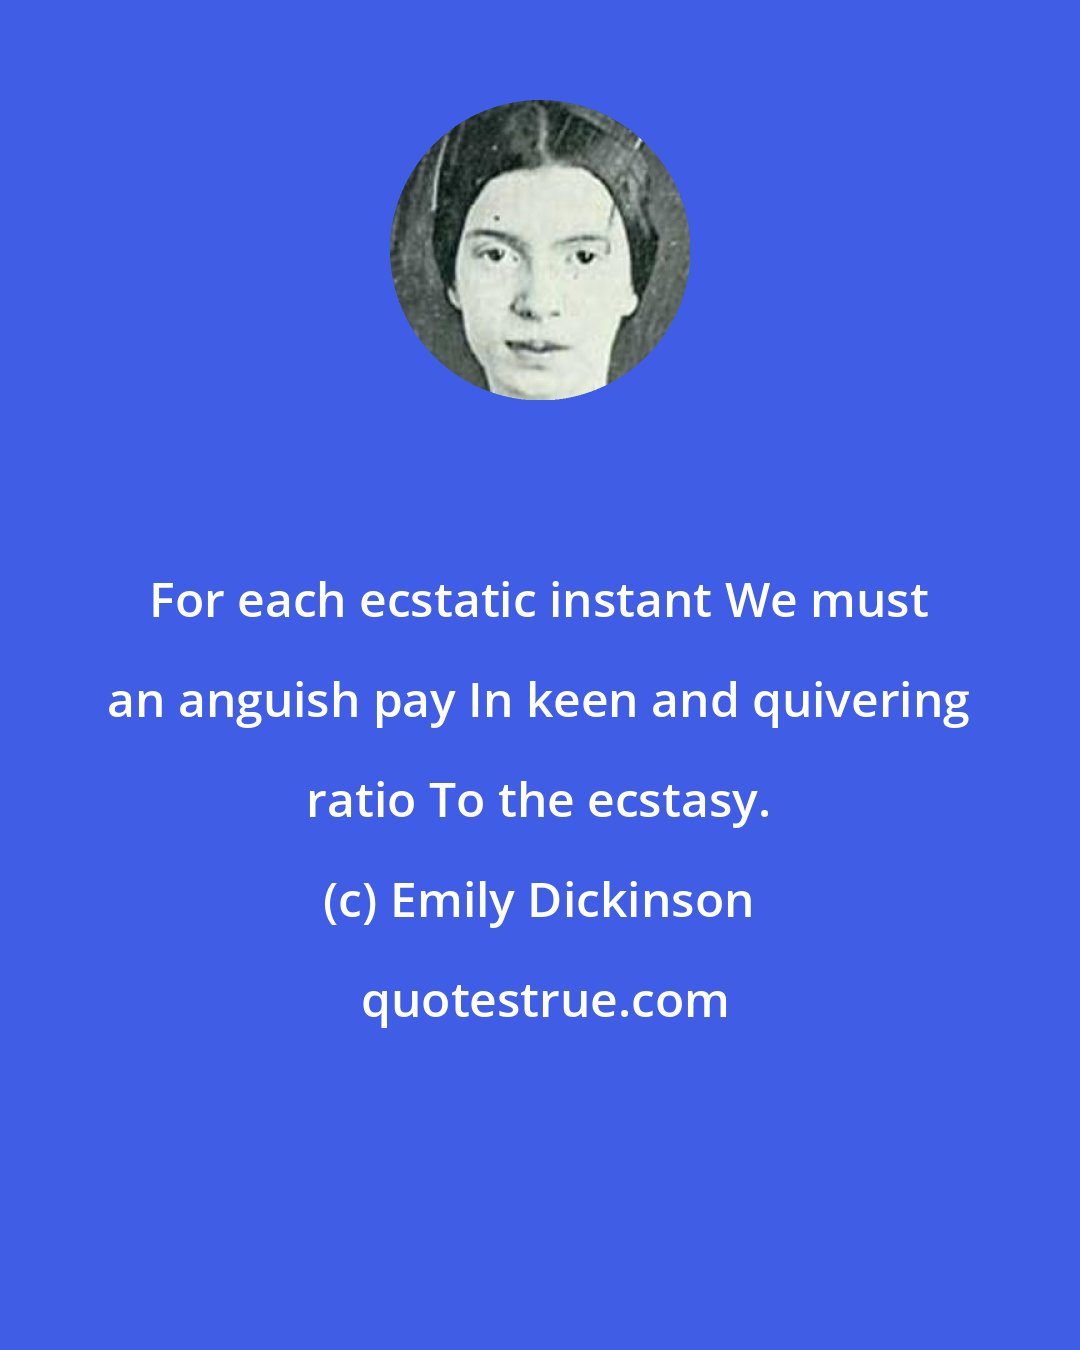 Emily Dickinson: For each ecstatic instant We must an anguish pay In keen and quivering ratio To the ecstasy.